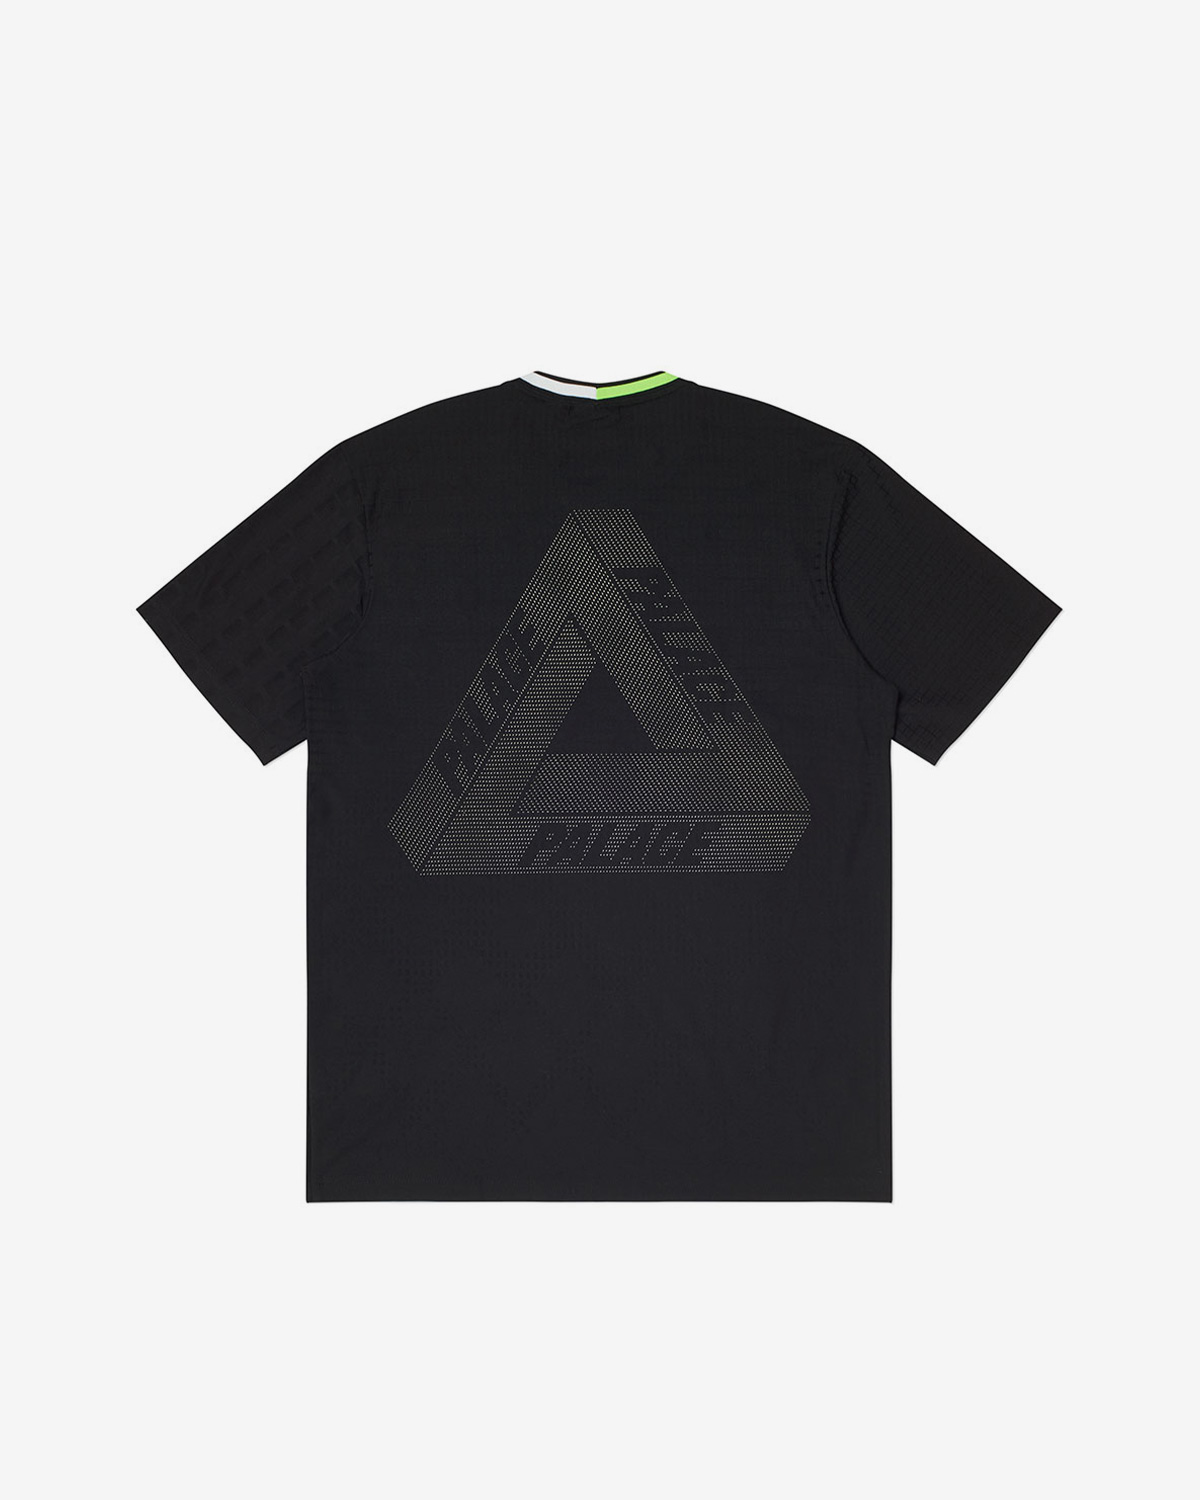 palace-adidas-golf-collaboration-official-look-02